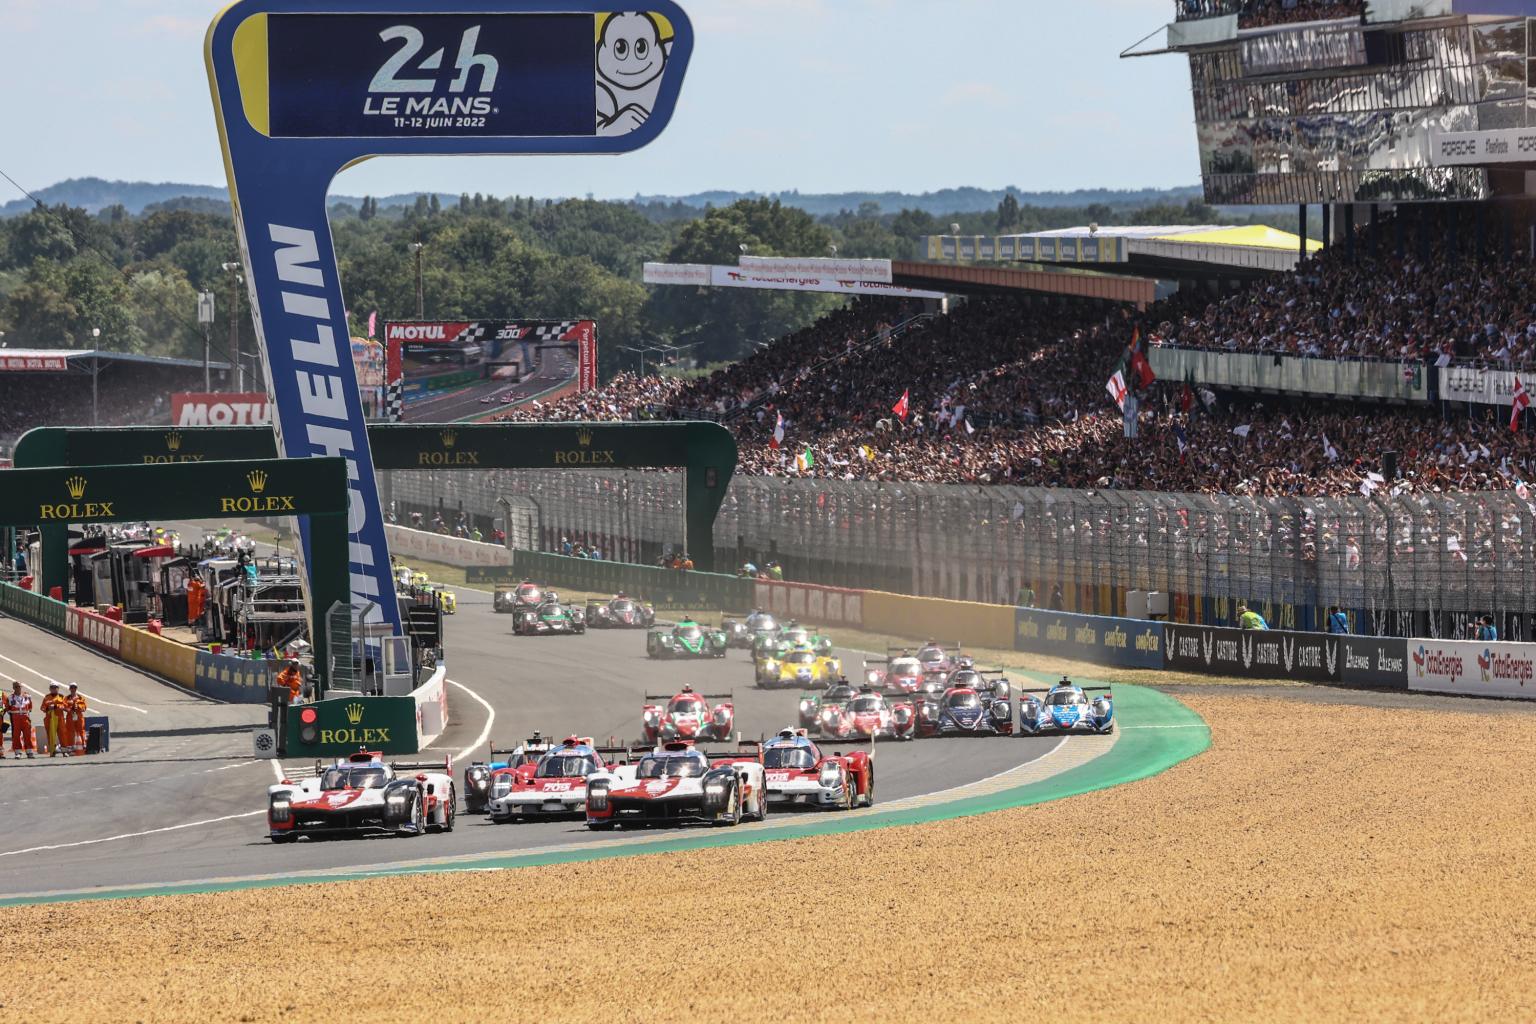 Start Your Engines 24 Hours of Le Mans is Here